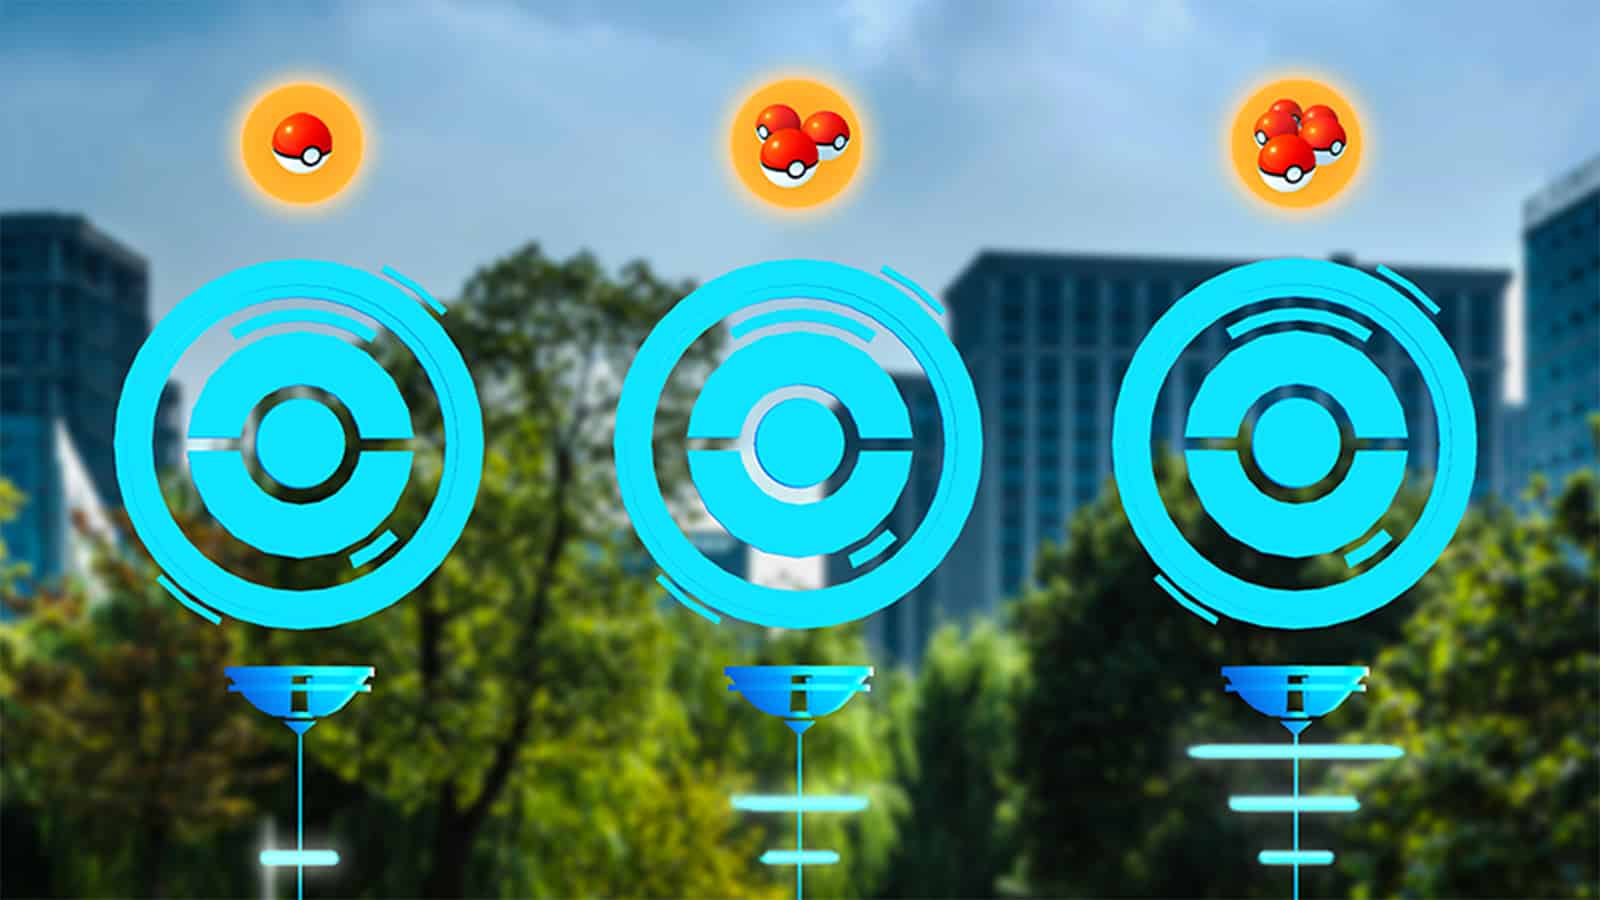 PokeStops in Pokemon Go that give out Field Research tasks